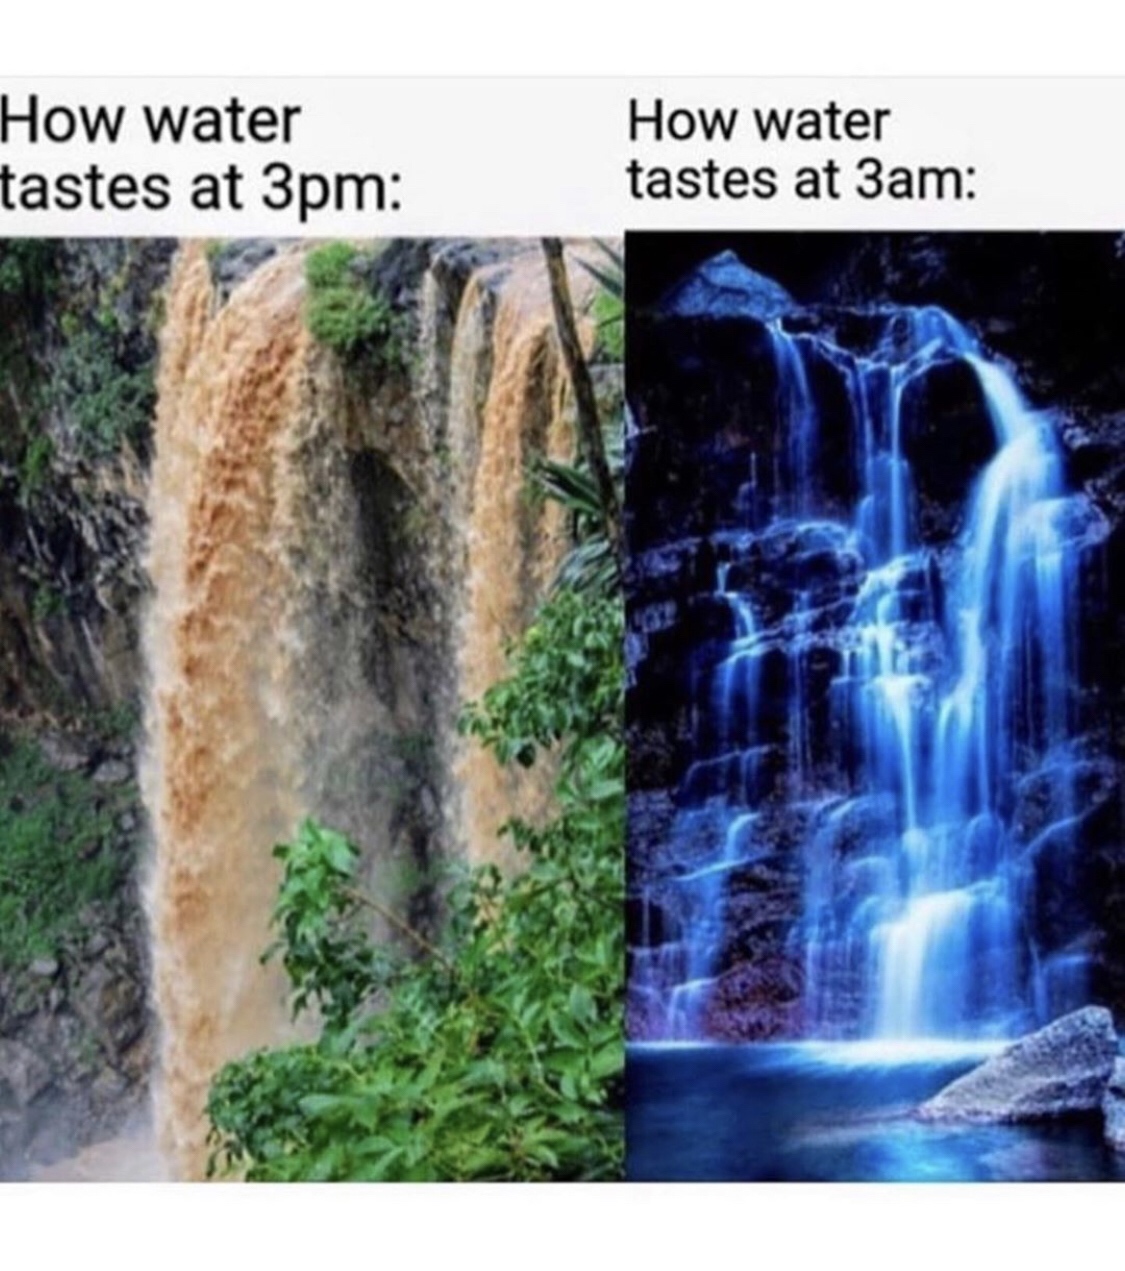 water at 3 pm and water at 3 am - How water tastes at 3pm How water tastes at 3am